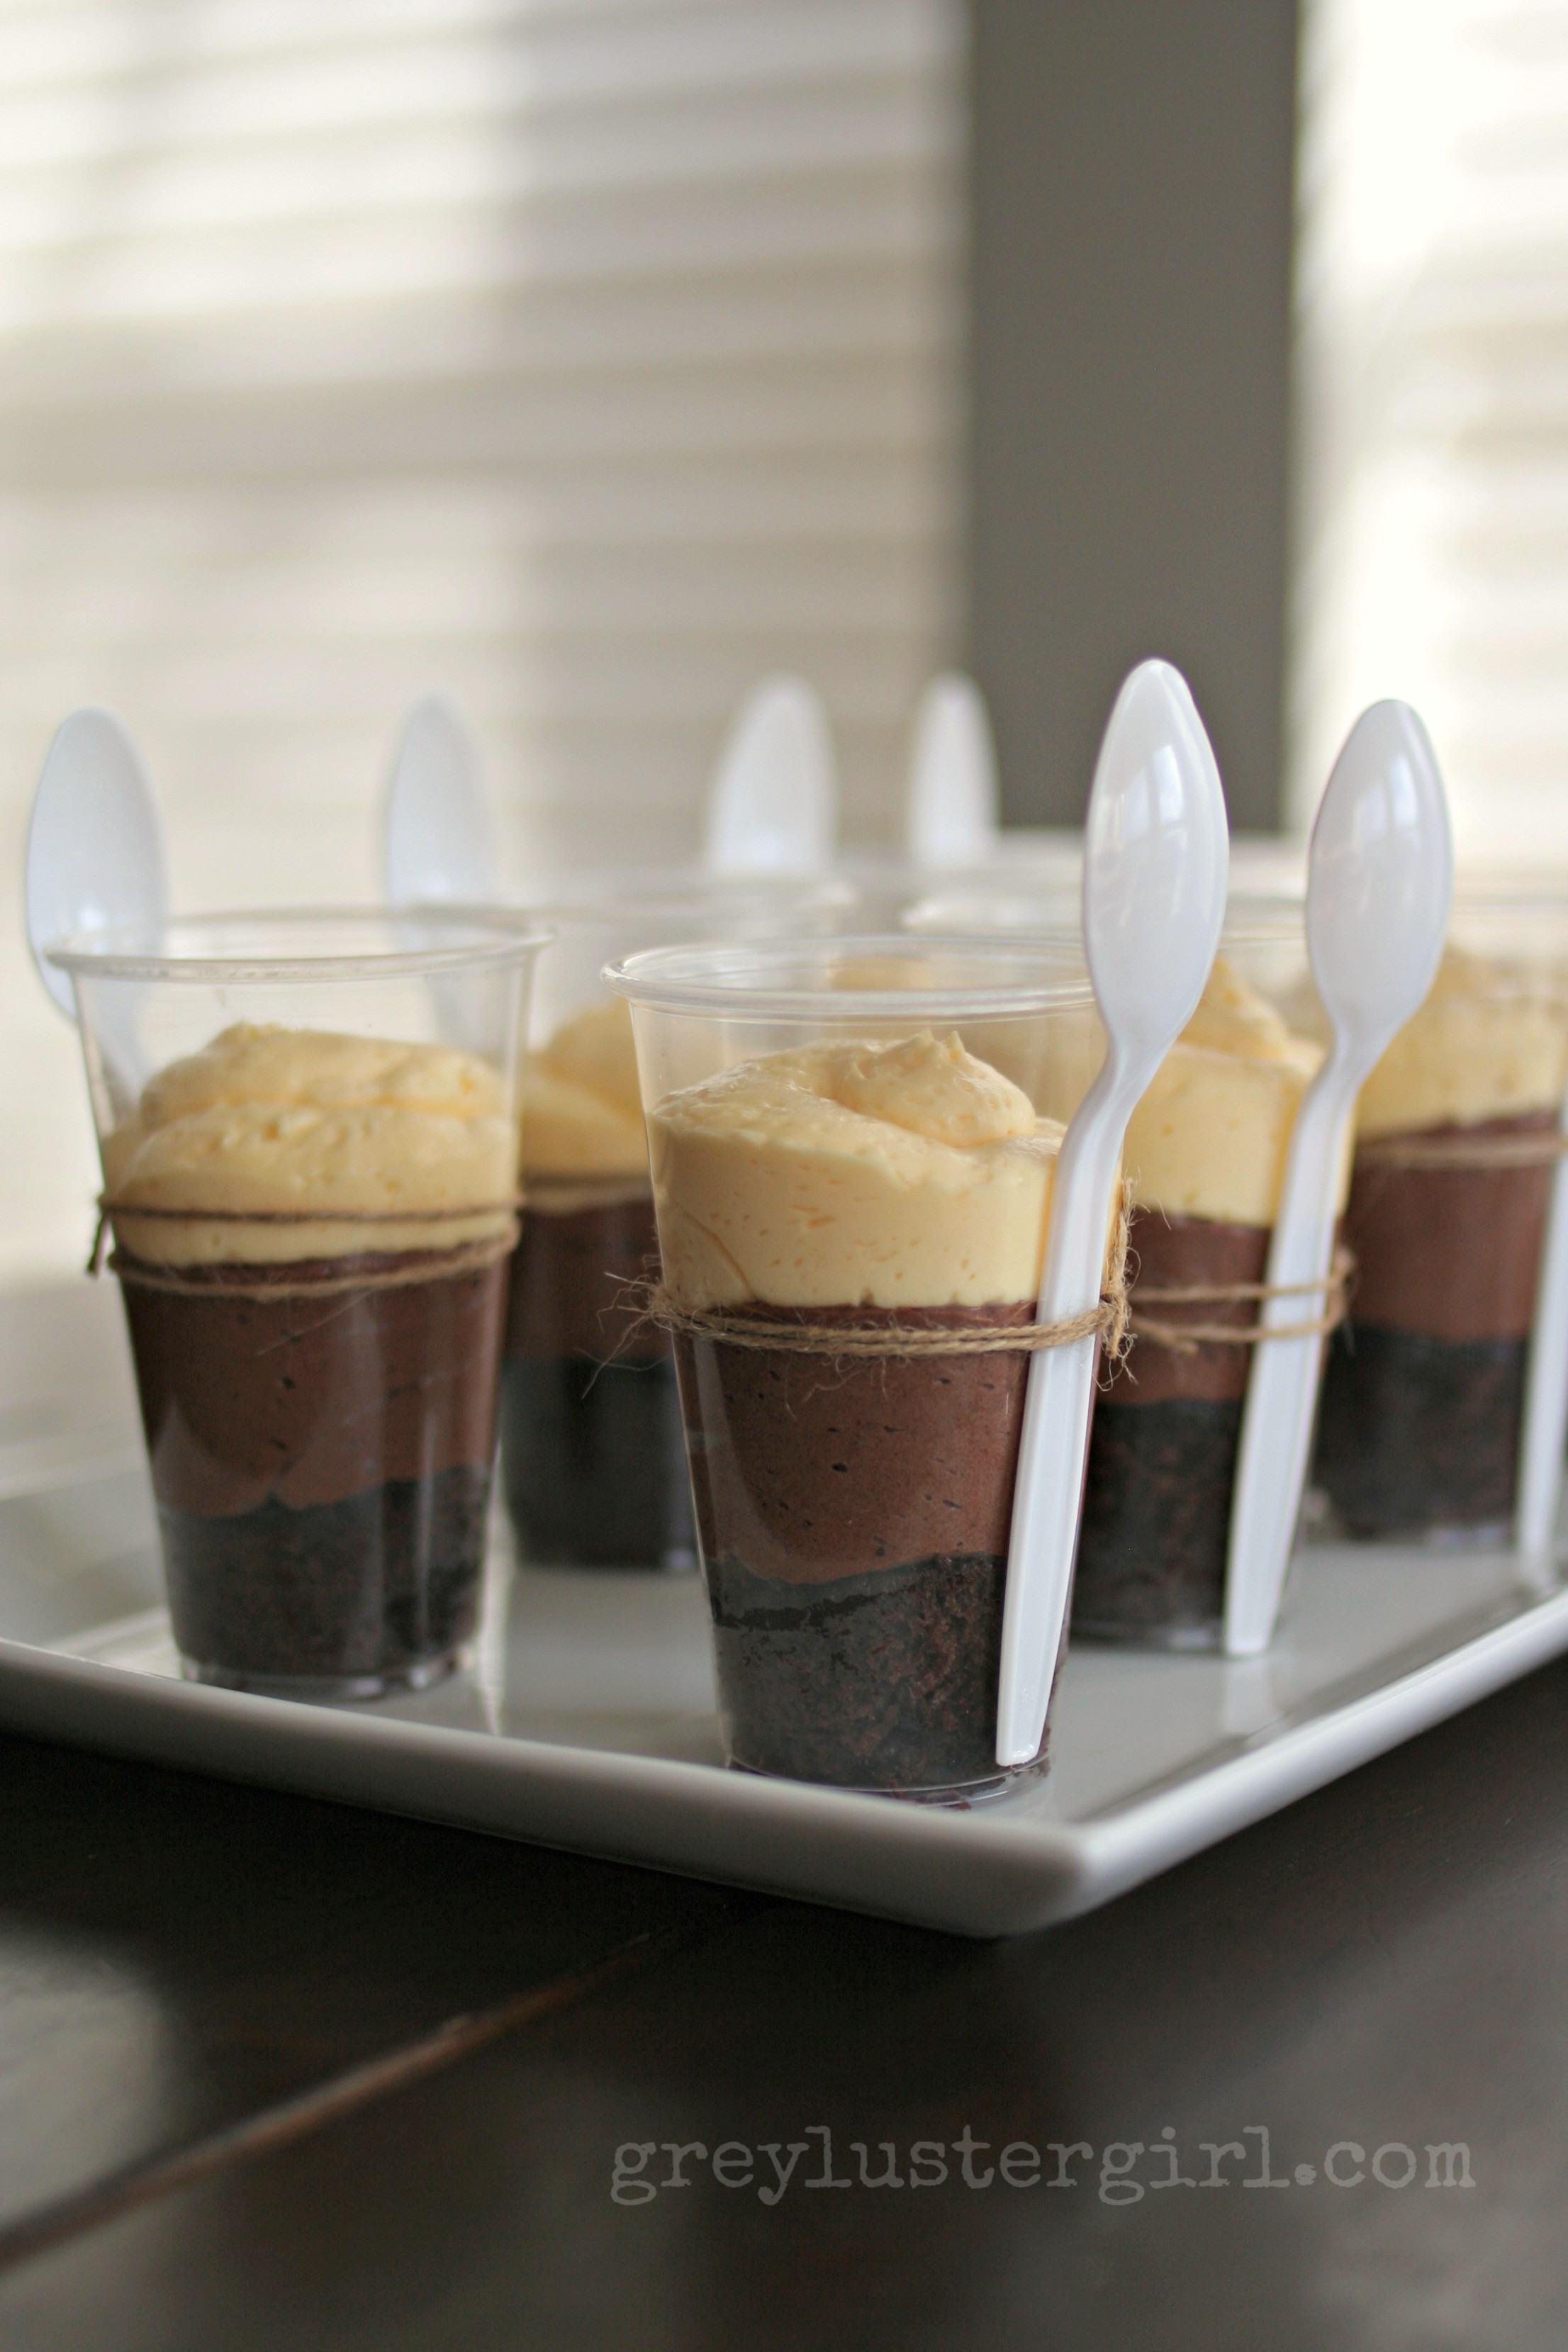 Chocolate Cake In A Cup
 Individual Chocolate Mousse & Cake Cups